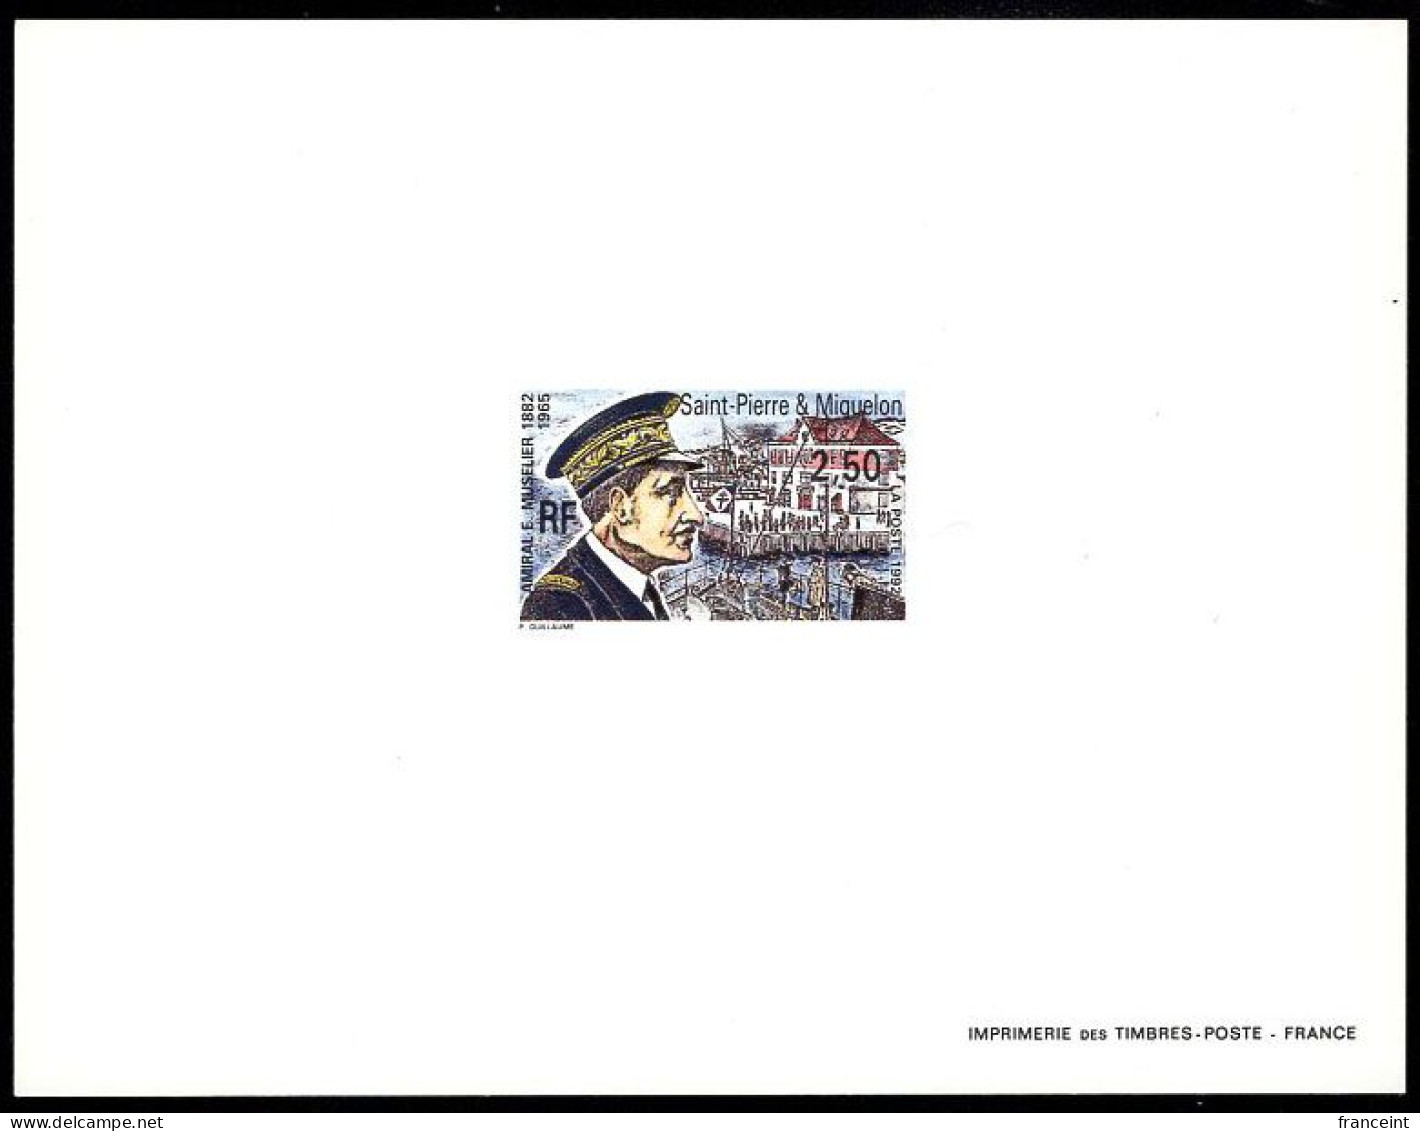 ST. PIERRE & MIQUELON(1992) Vice Admiral Muselier. Deluxe Sheet. Scott No 576. - Imperforates, Proofs & Errors